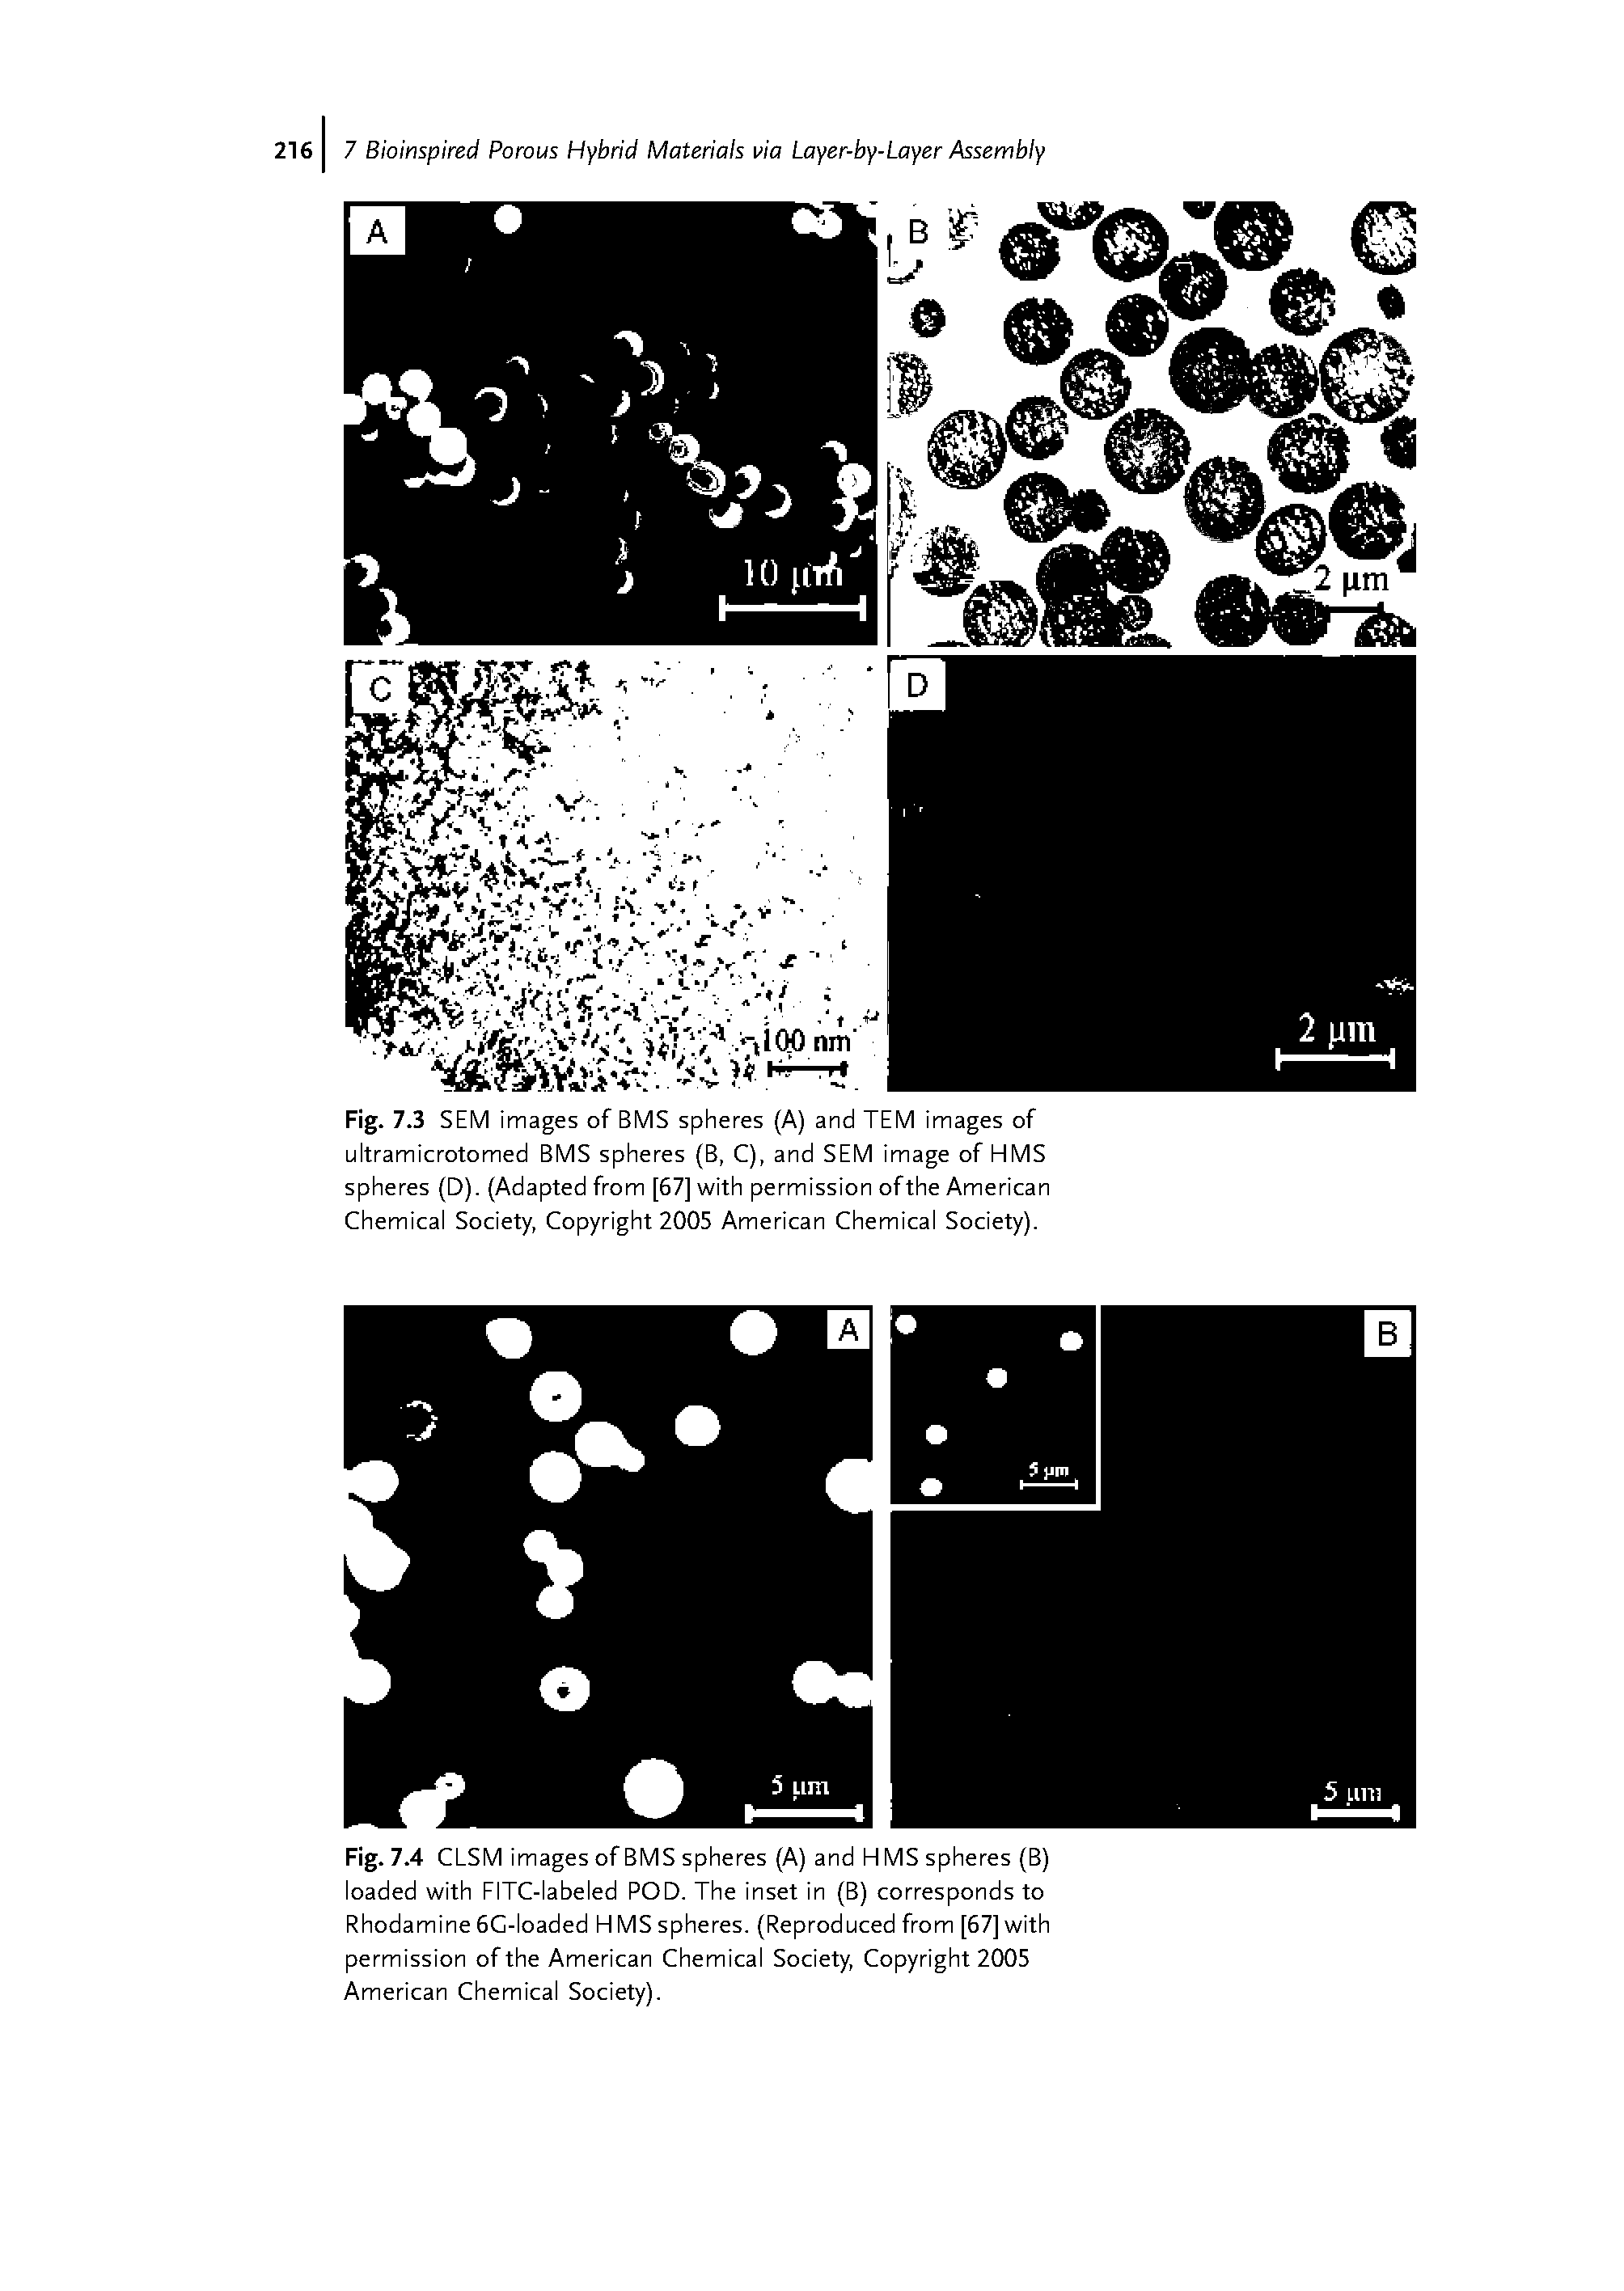 Fig. 7.4 CLSM images of BMS spheres (A) and HMS spheres (B) loaded with FITC-labeled POD. The inset in (B) corresponds to Rhodamine 6G-loaded H MS spheres. (Reproduced from [67] with permission ofthe American Chemical Society, Copyright 2005 American Chemical Society).